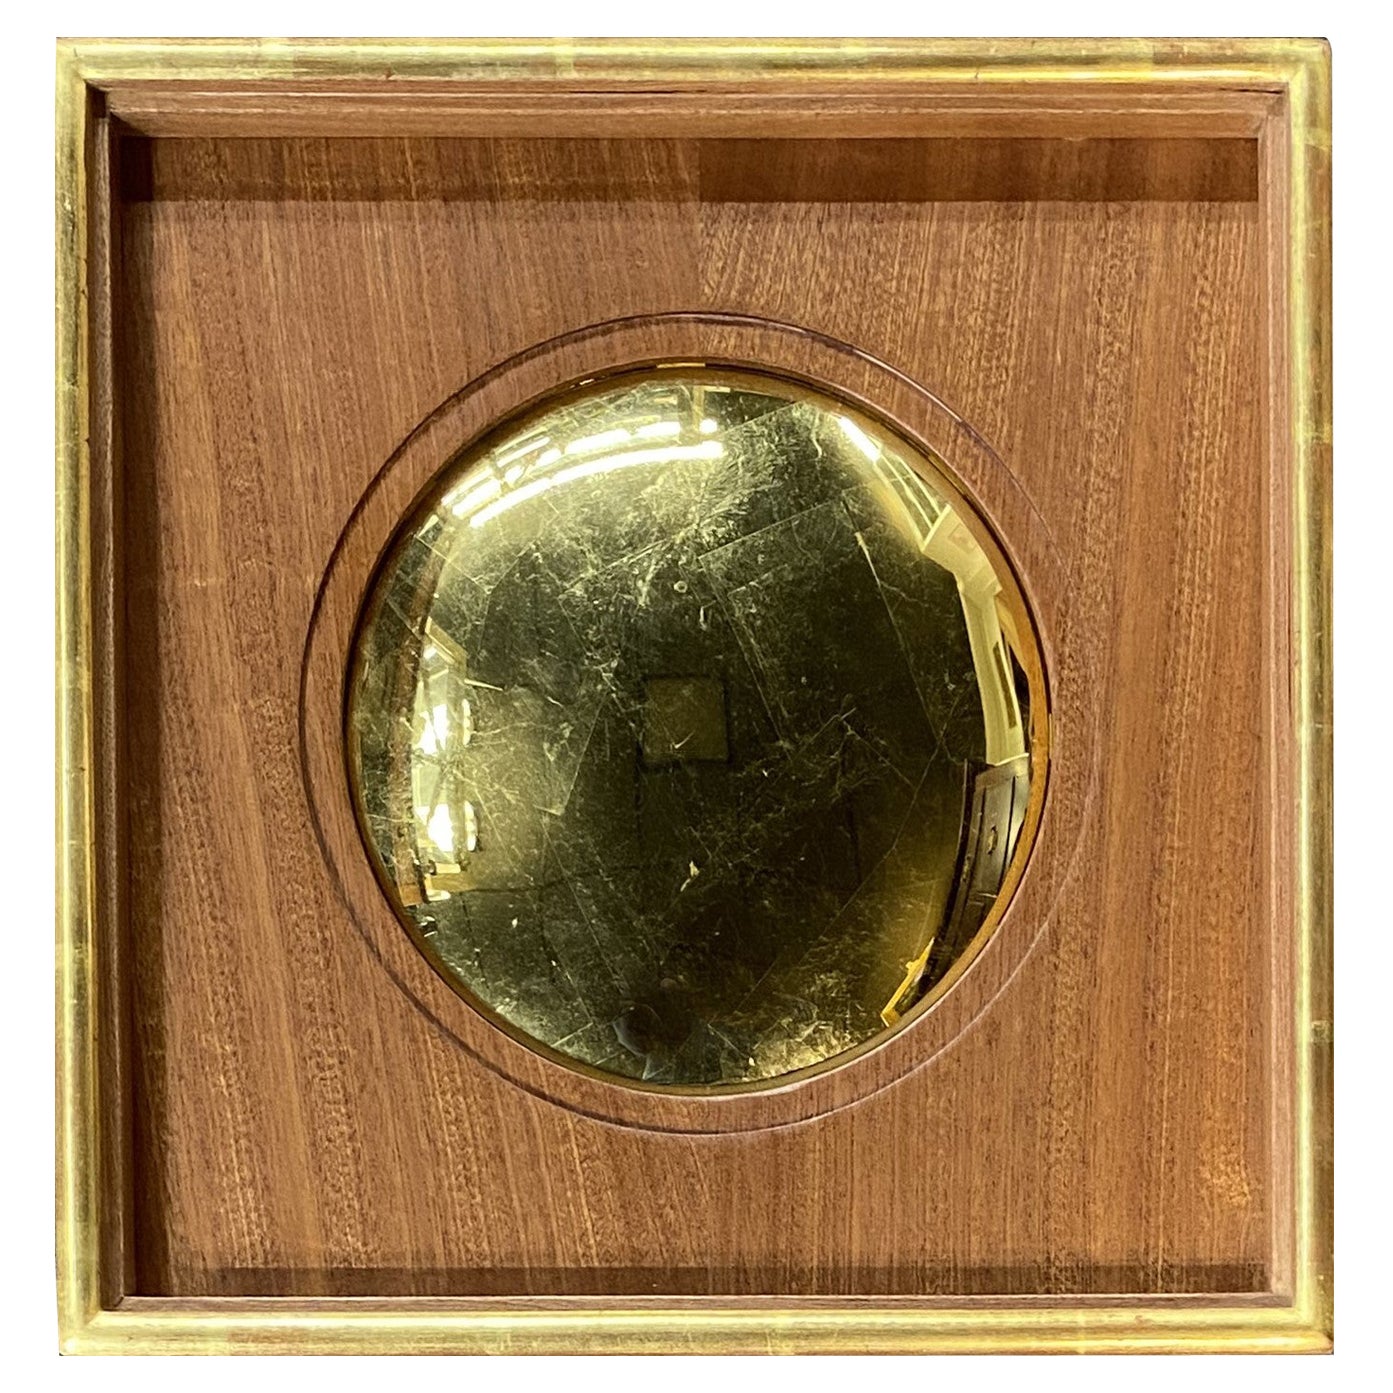 Troy M. Stafford Hand Crafted 22K Gilded Looking Glass in Sapele Wood  Frame For Sale